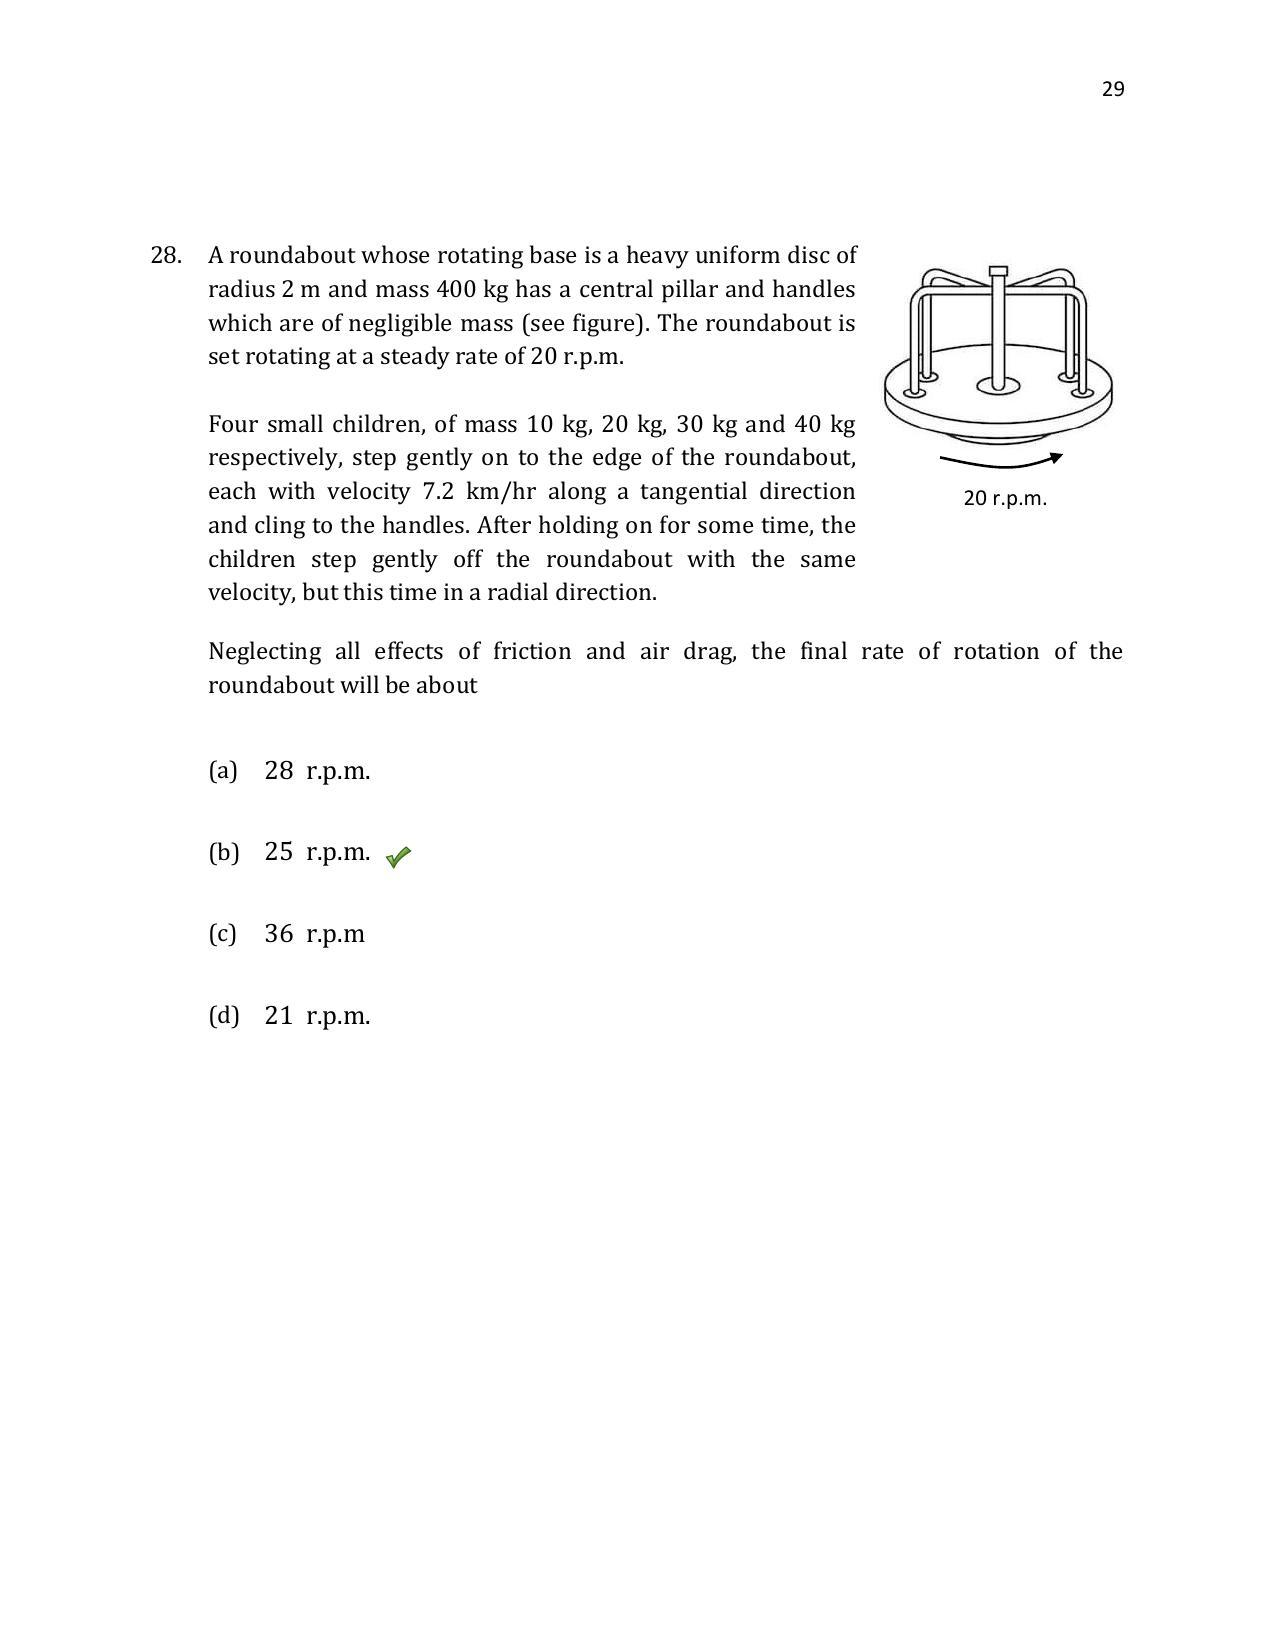 TIFR GS 2020 Physics Question Paper - Page 30